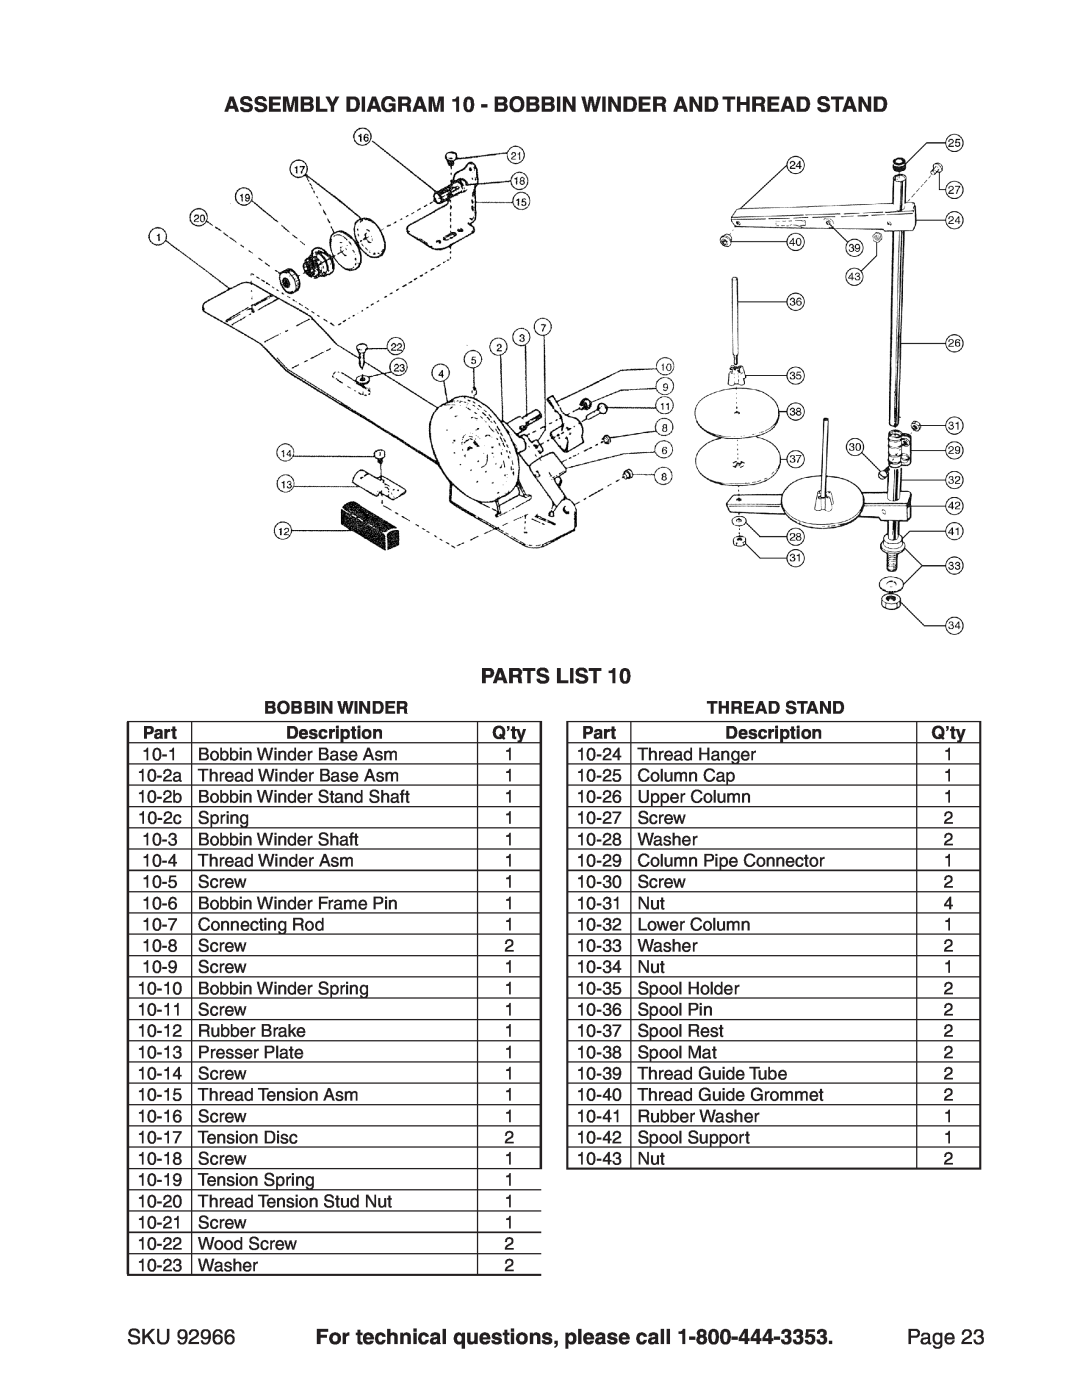 Harbor Freight Tools 92966 ASSEMBLY Diagram 10 - Bobbin Winder and Thread Stand PARTS LIST, Page, Part, Description, Q’ty 